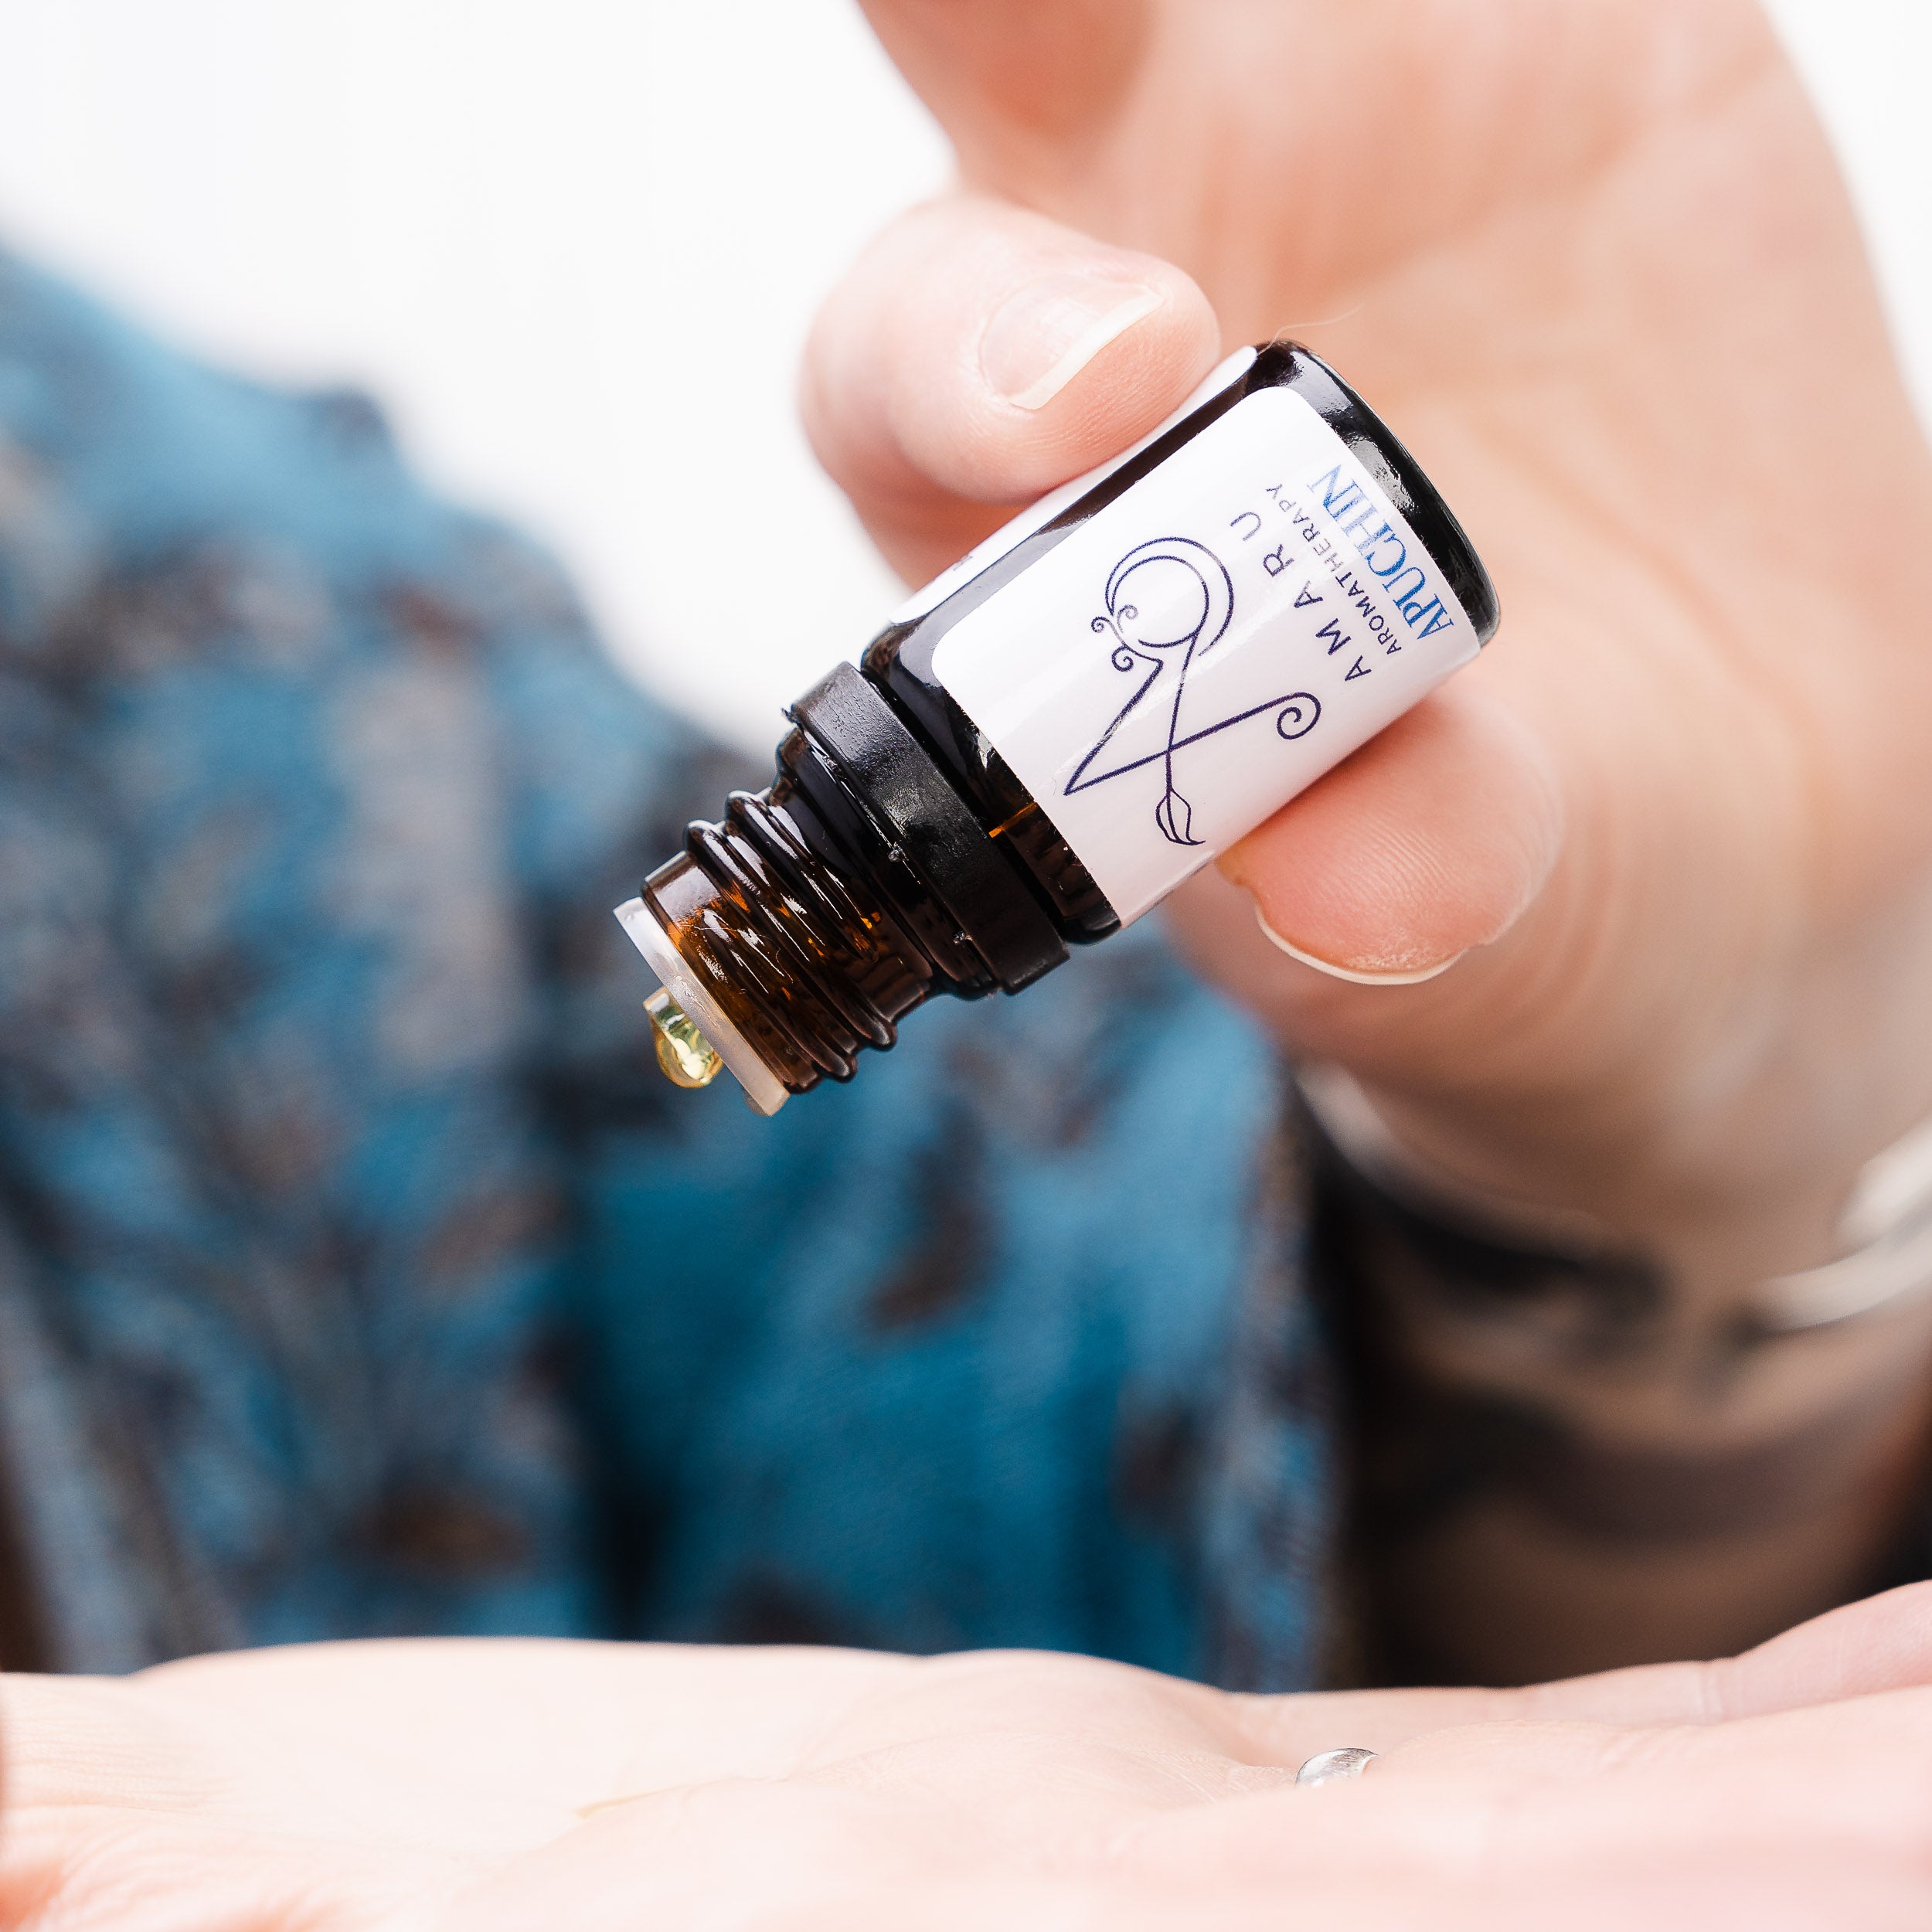 Apuchin Essential Oil: Discover the Magic of Brightness and Balance